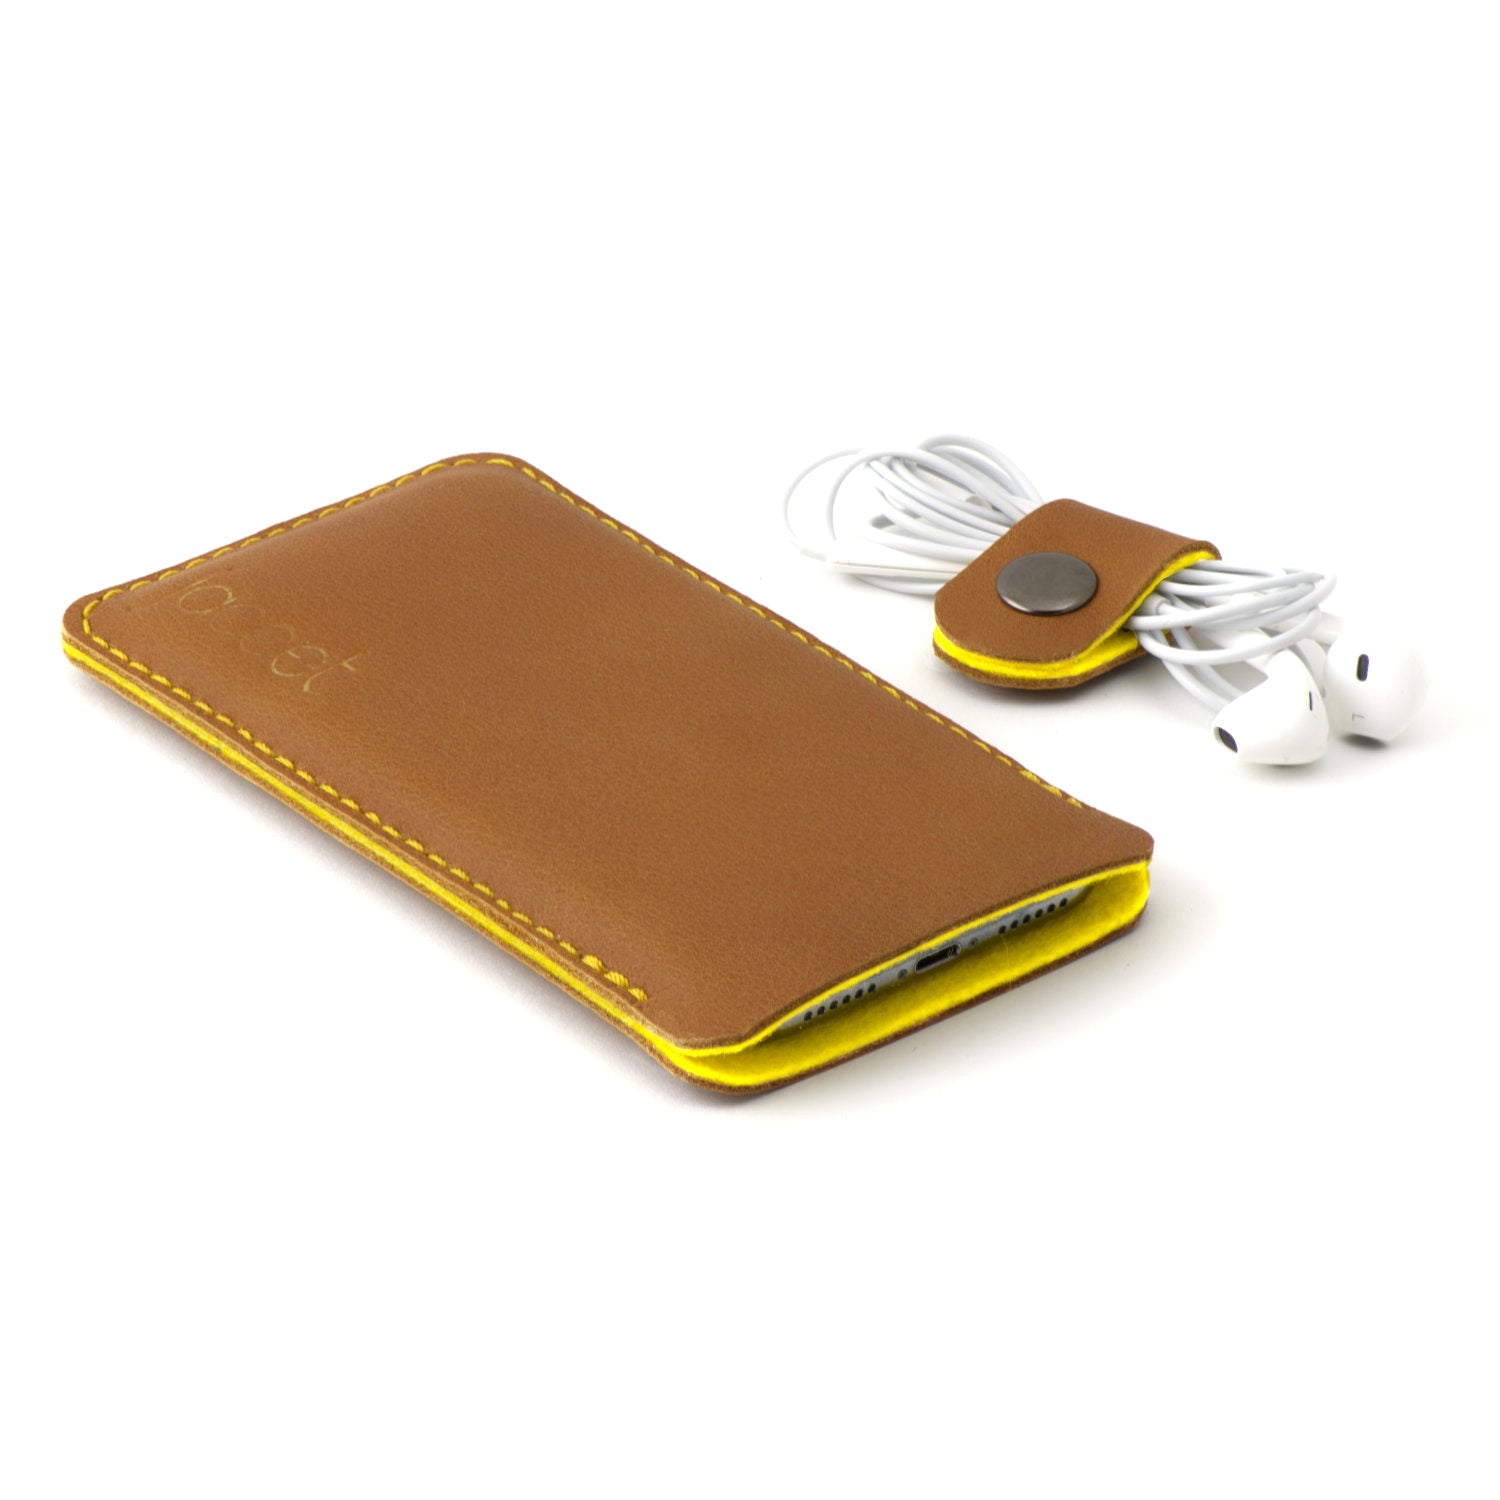 JACCET leather Sony Xperia sleeve - Cognac color leather with yellow wool felt - 100% Handmade